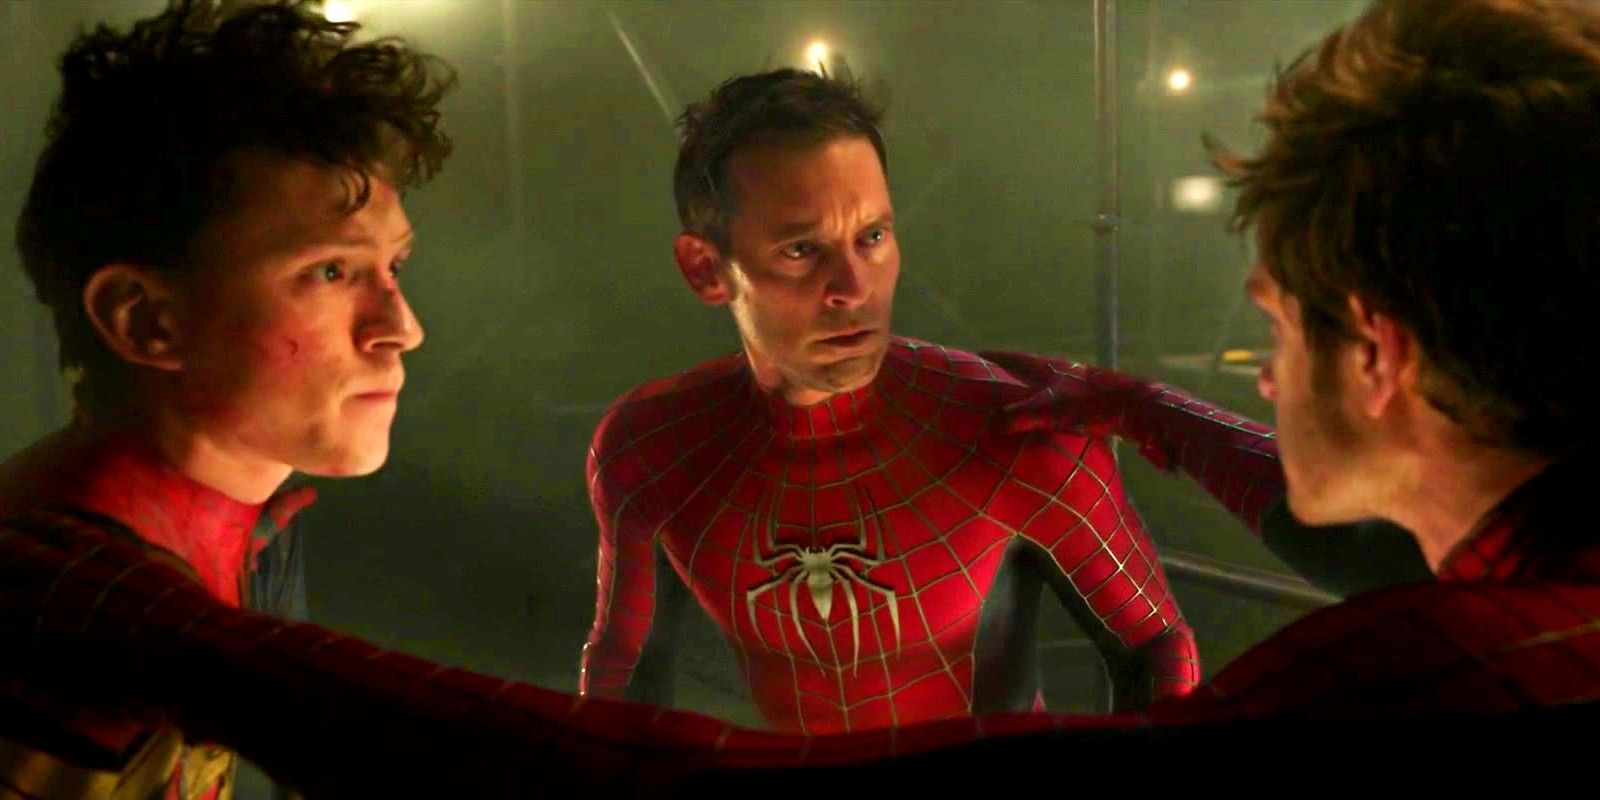 All three Peter Parkers go over their plan in Spider-Man: No Way Home